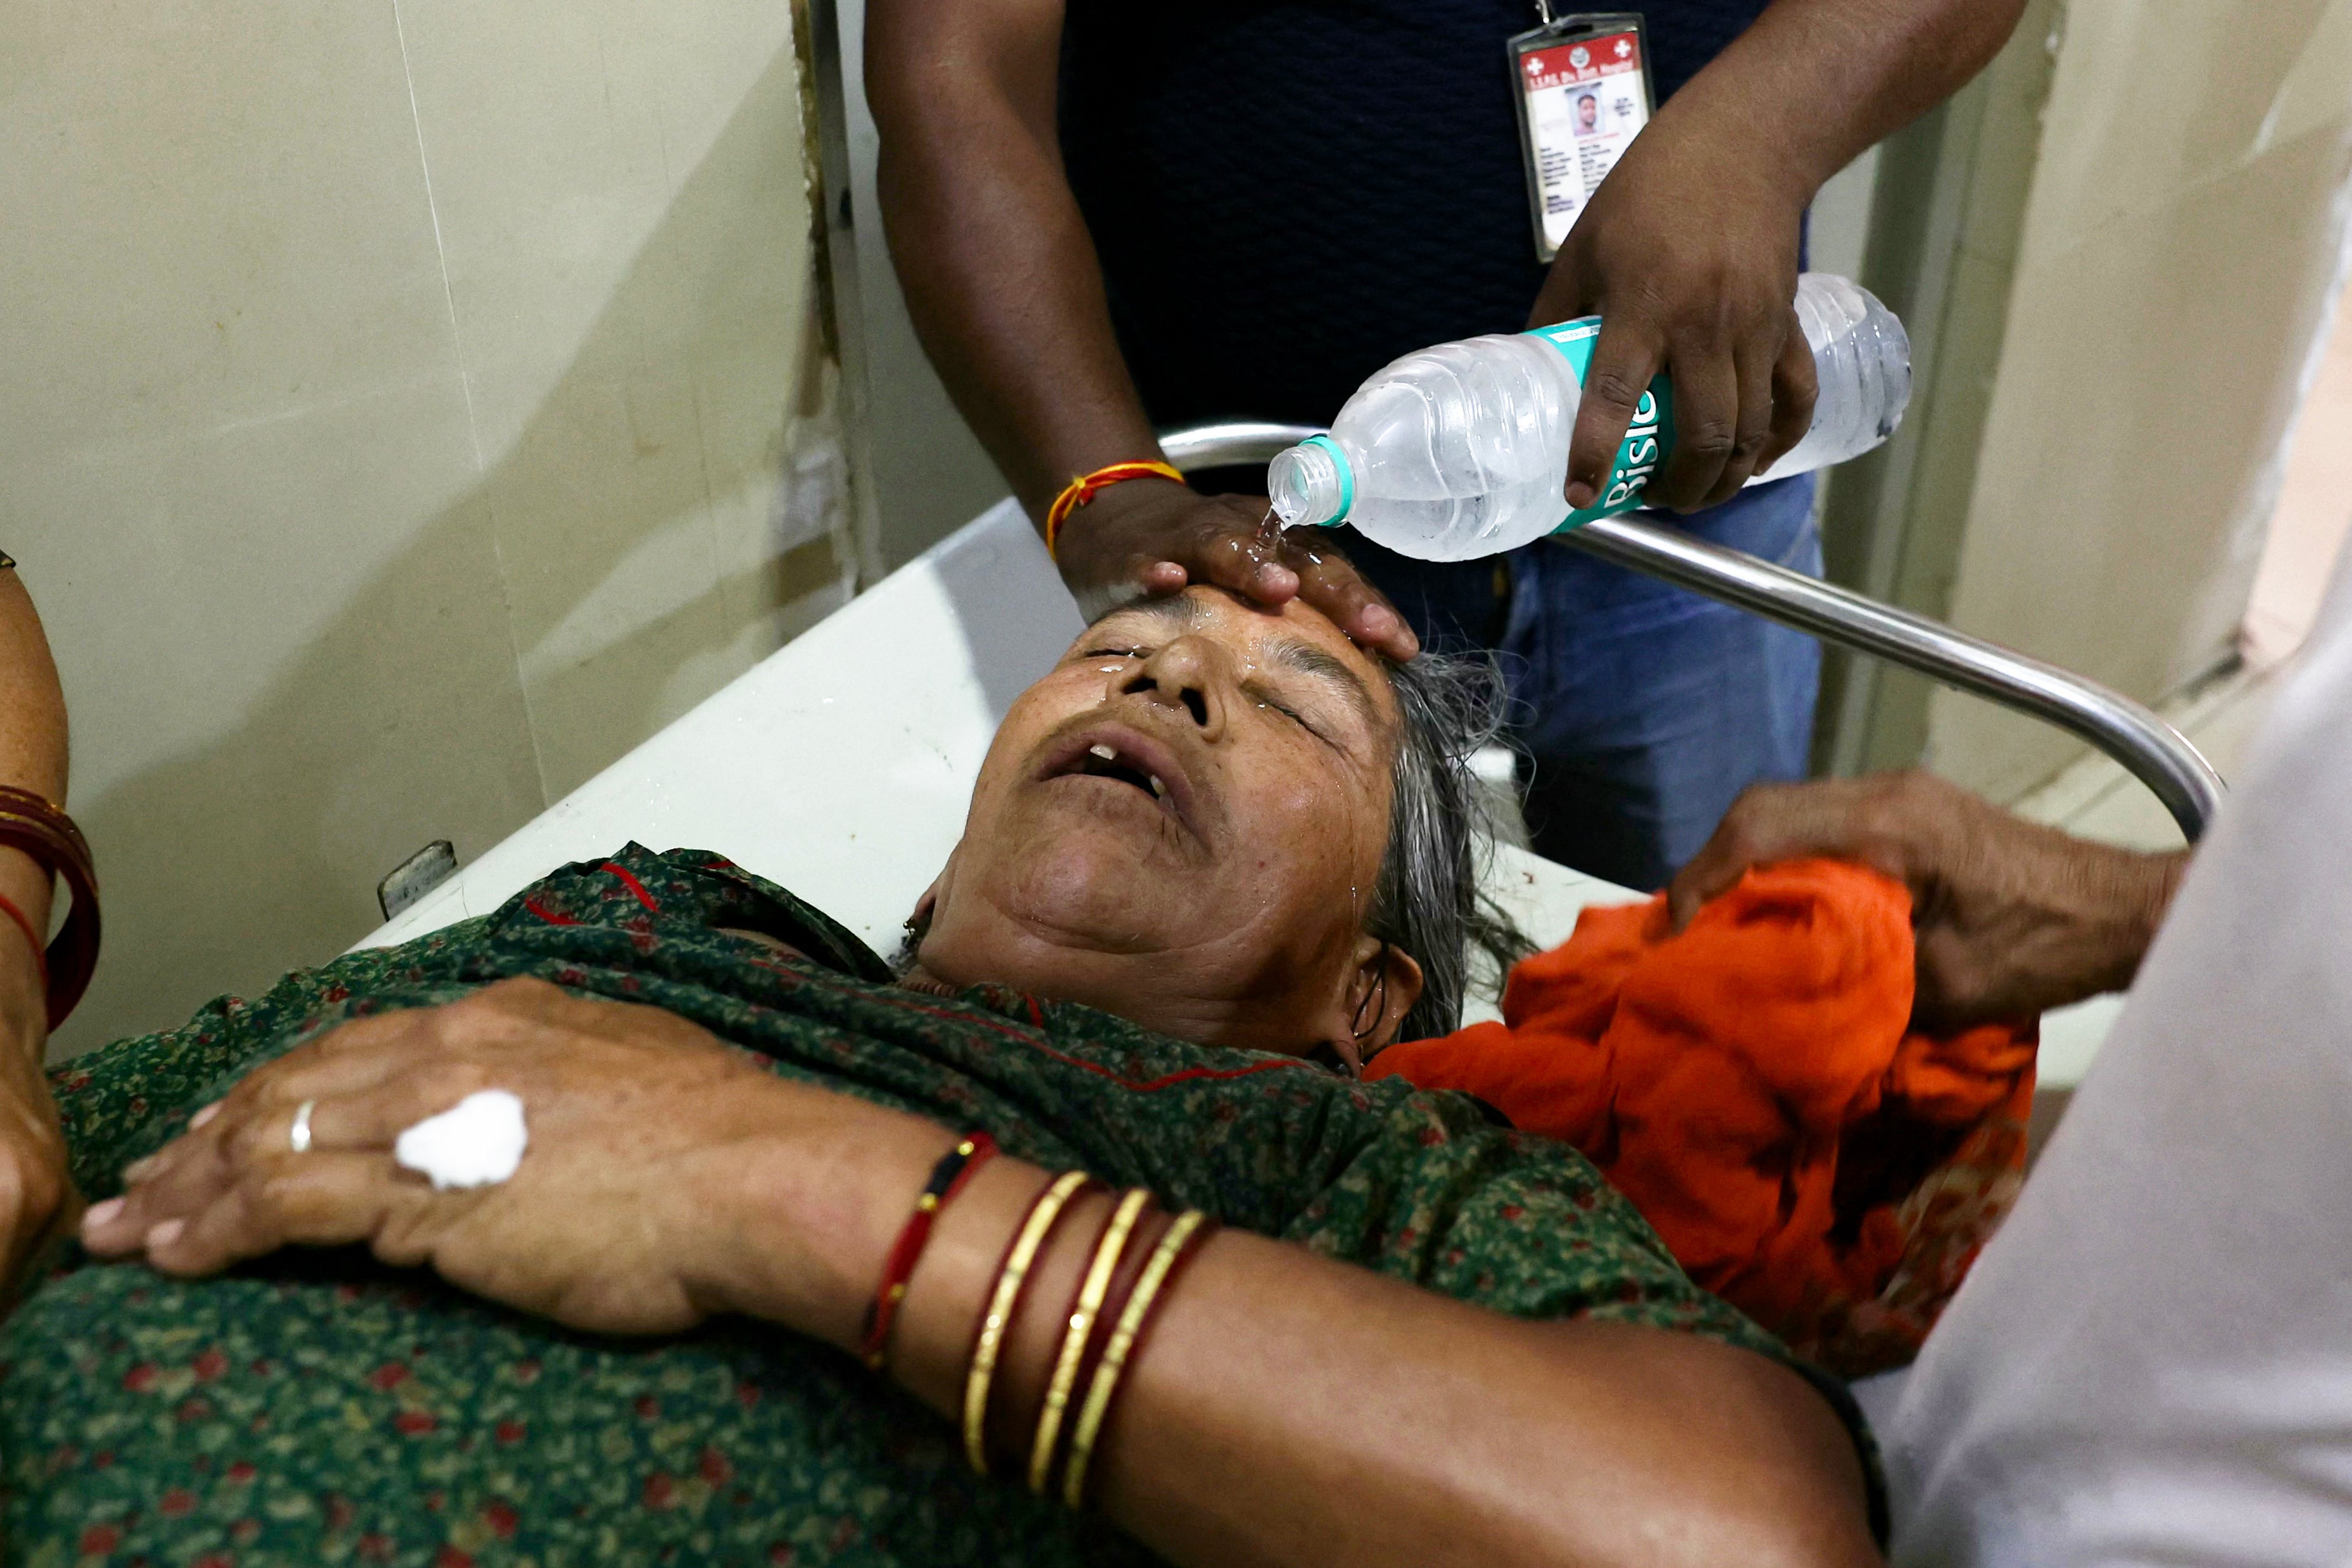 A hospital employee pours water on the face of a heat stroke patient at a government hospital in Varanasi, where the heat wave was severe.